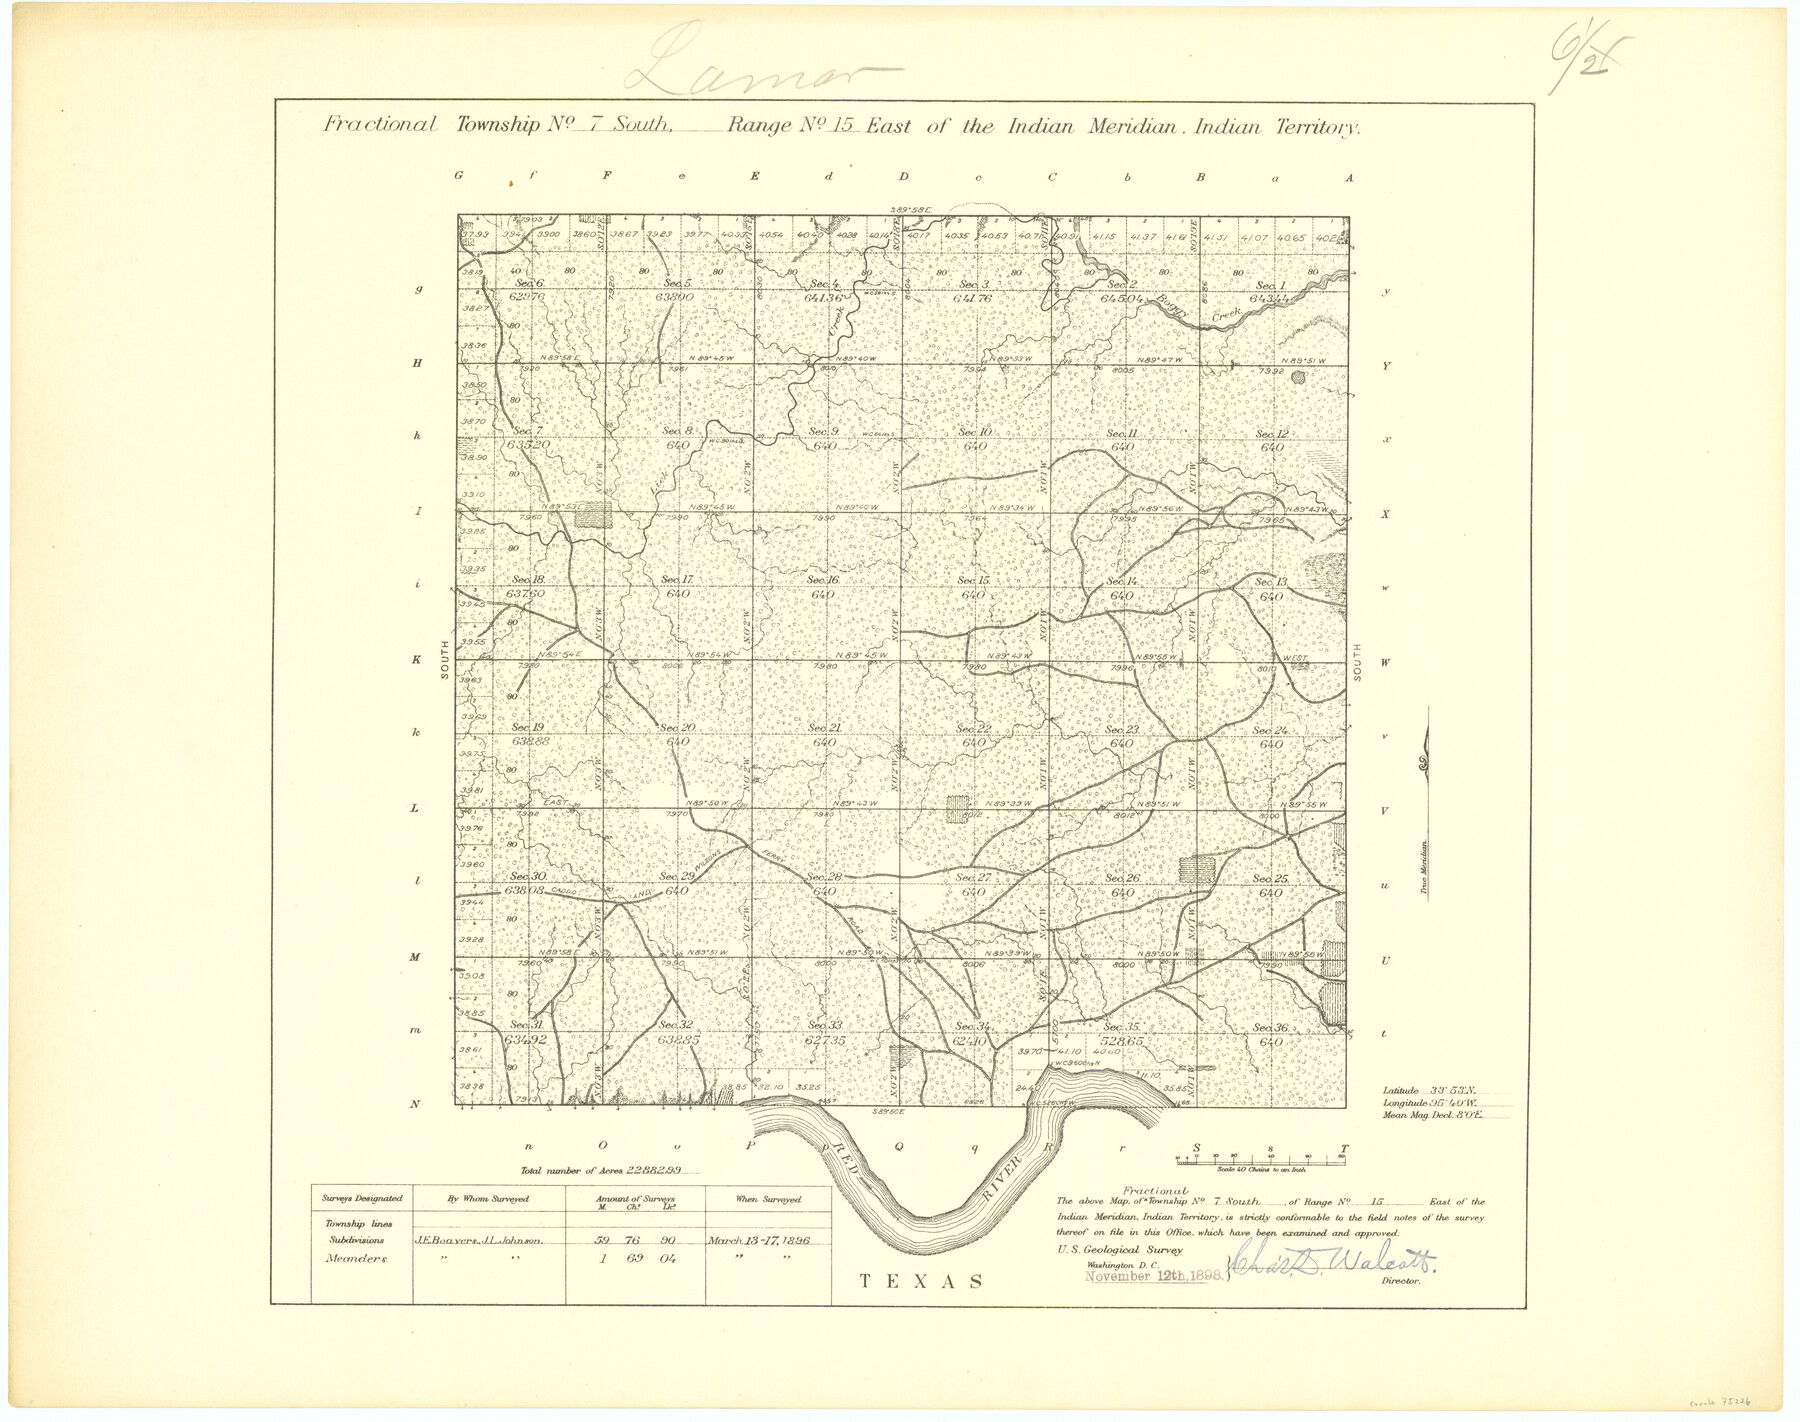 75226, Fractional Township No. 7 South Range No. 15 East of the Indian Meridian, Indian Territory, General Map Collection